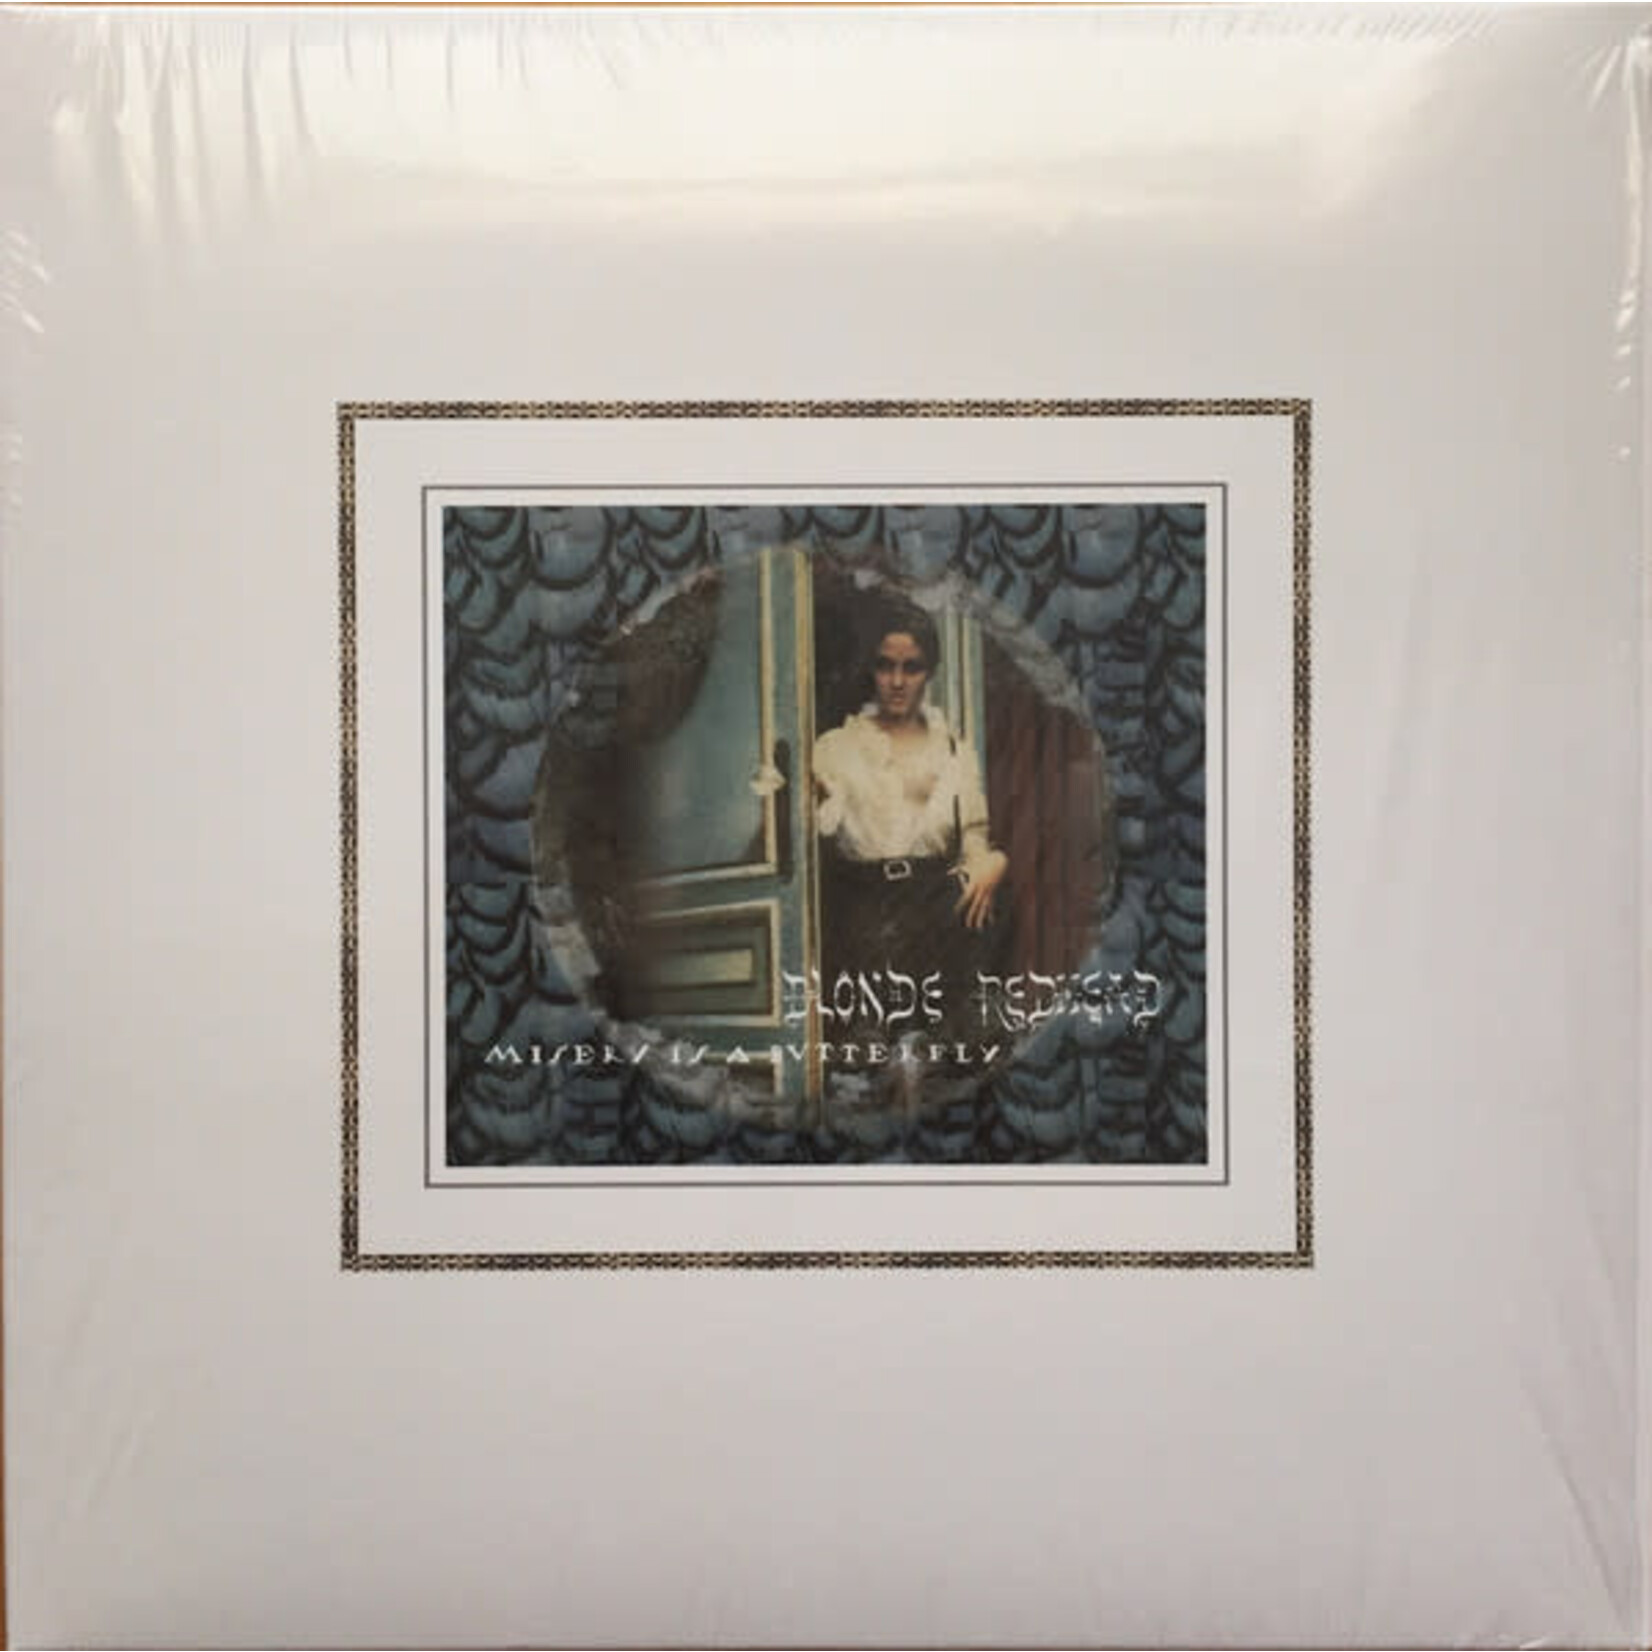 4AD Blonde Redhead - Misery Is A Butterfly (LP)